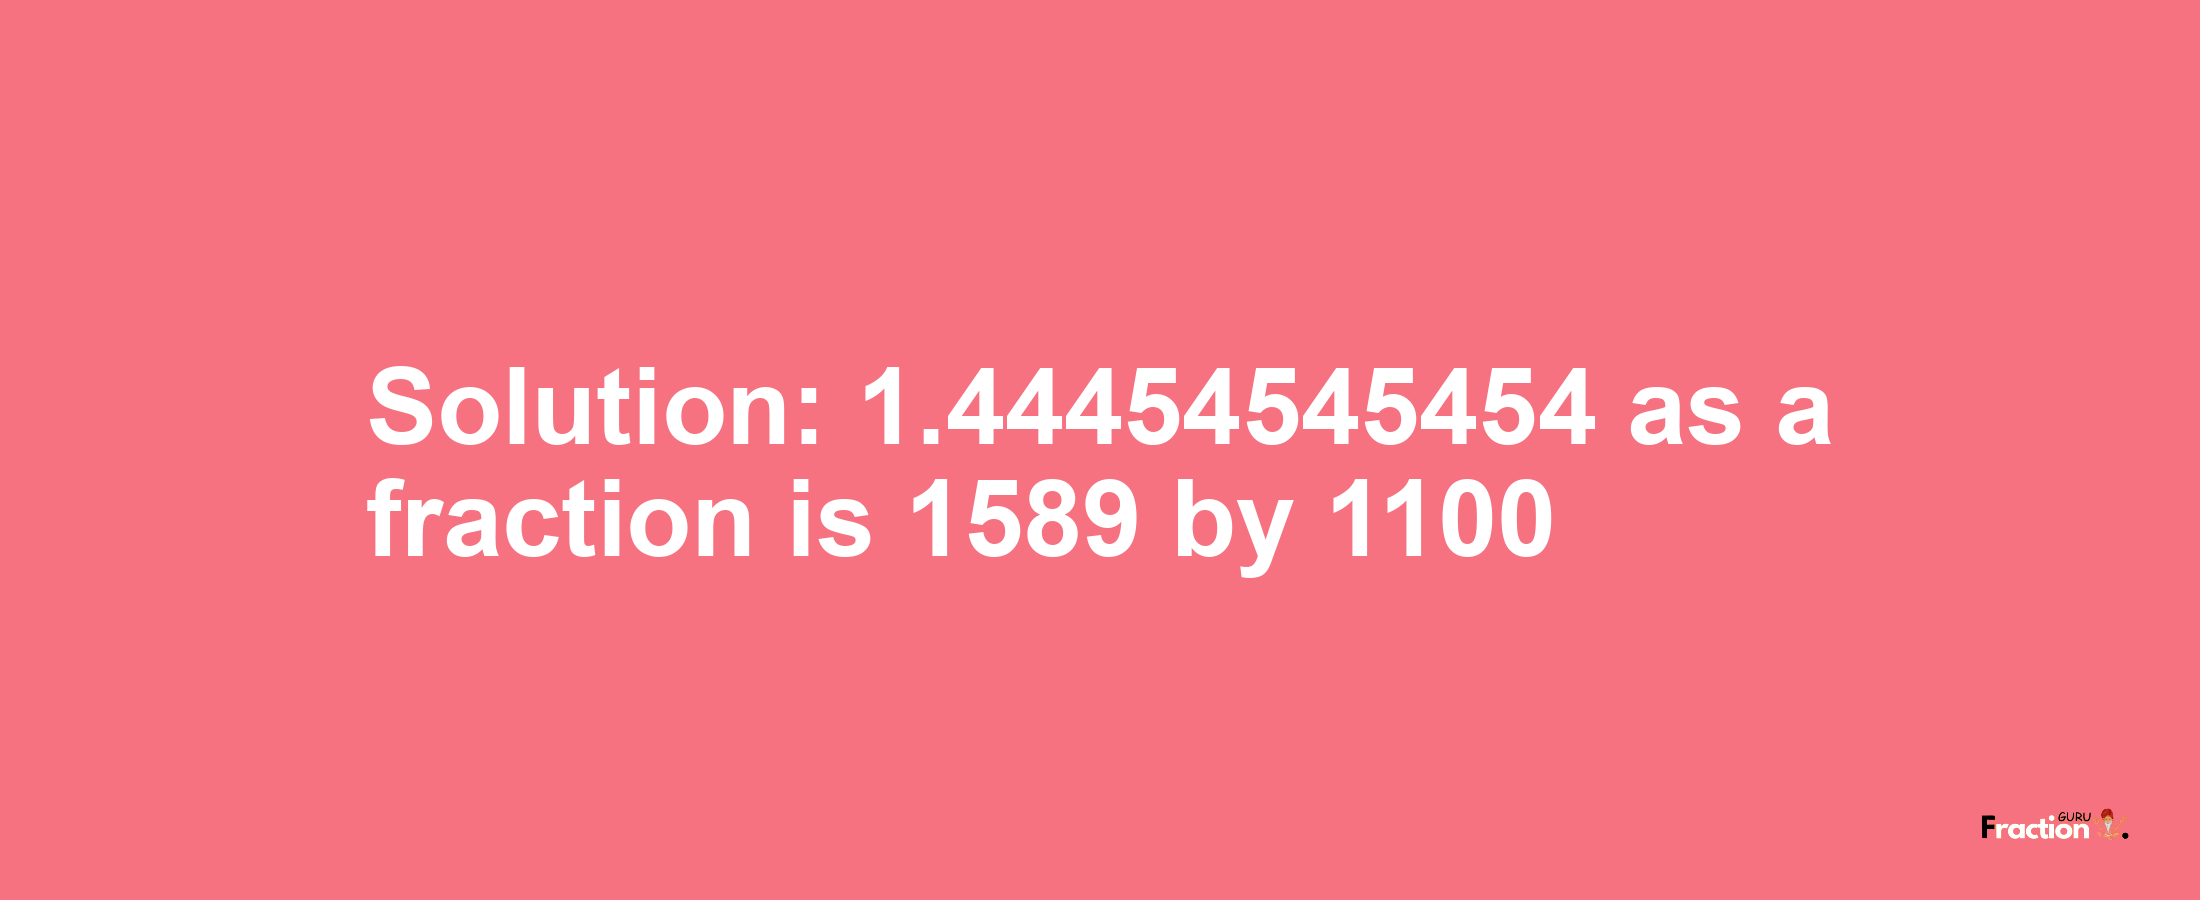 Solution:1.44454545454 as a fraction is 1589/1100